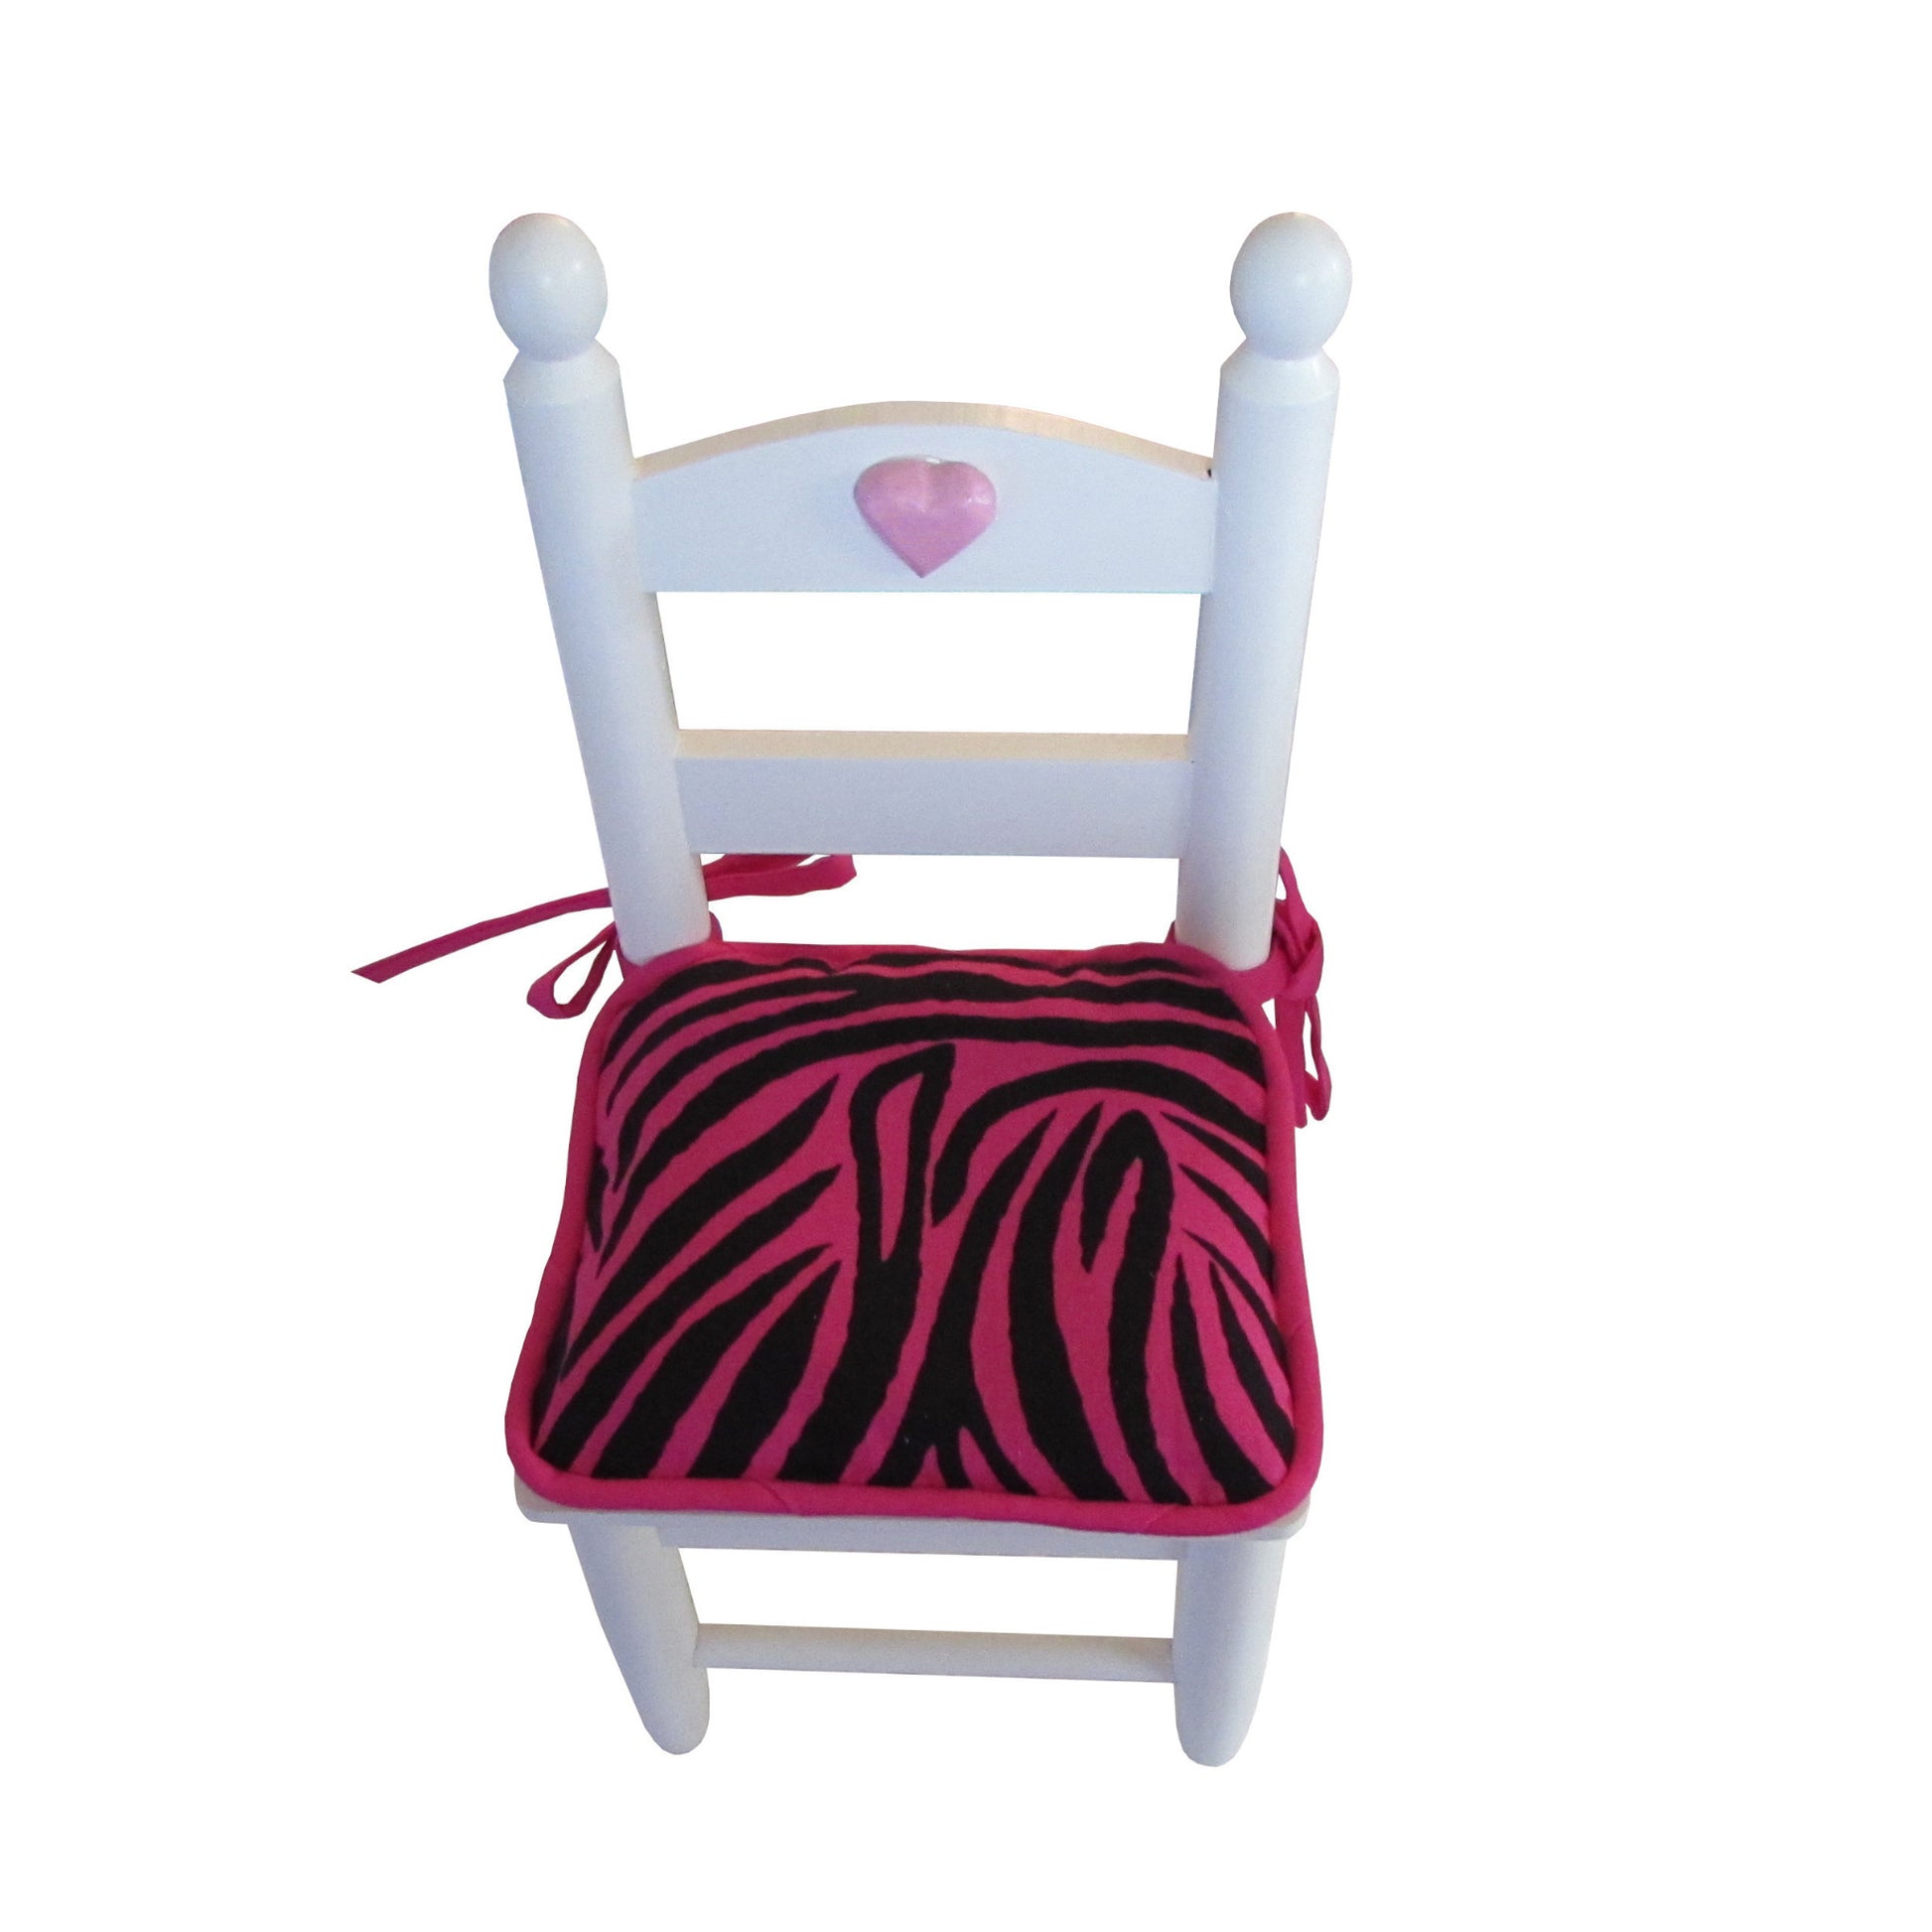 Pink Zebra Print Doll Chair Cushion for 18-inch dolls Second view